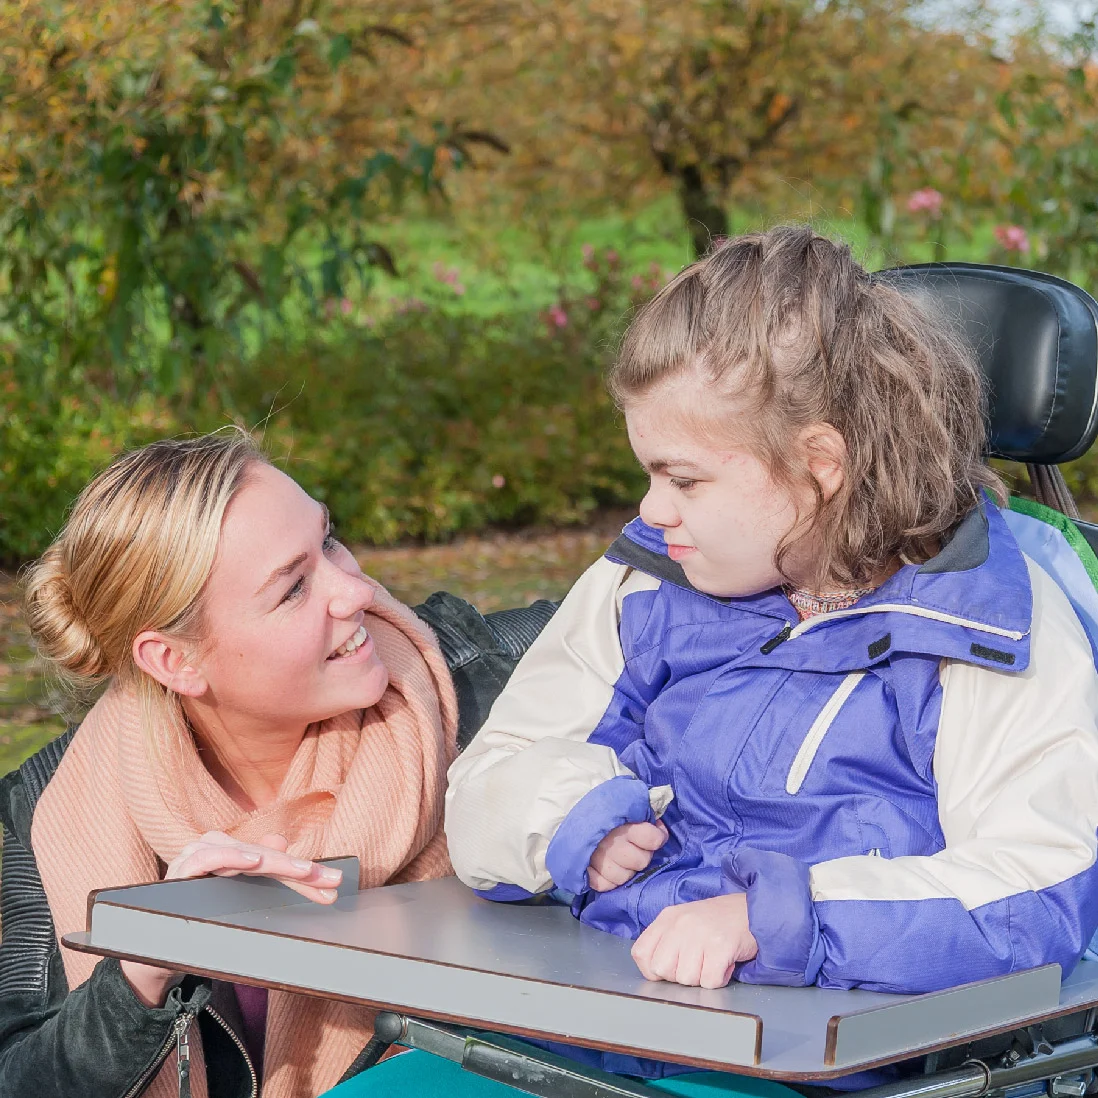 A smiling woman leans towards a young girl in a wheelchair, both enjoying a sunny day outdoors surrounded by autumn foliage. The girl, wearing a purple jacket, looks at the woman affectionately as they discuss